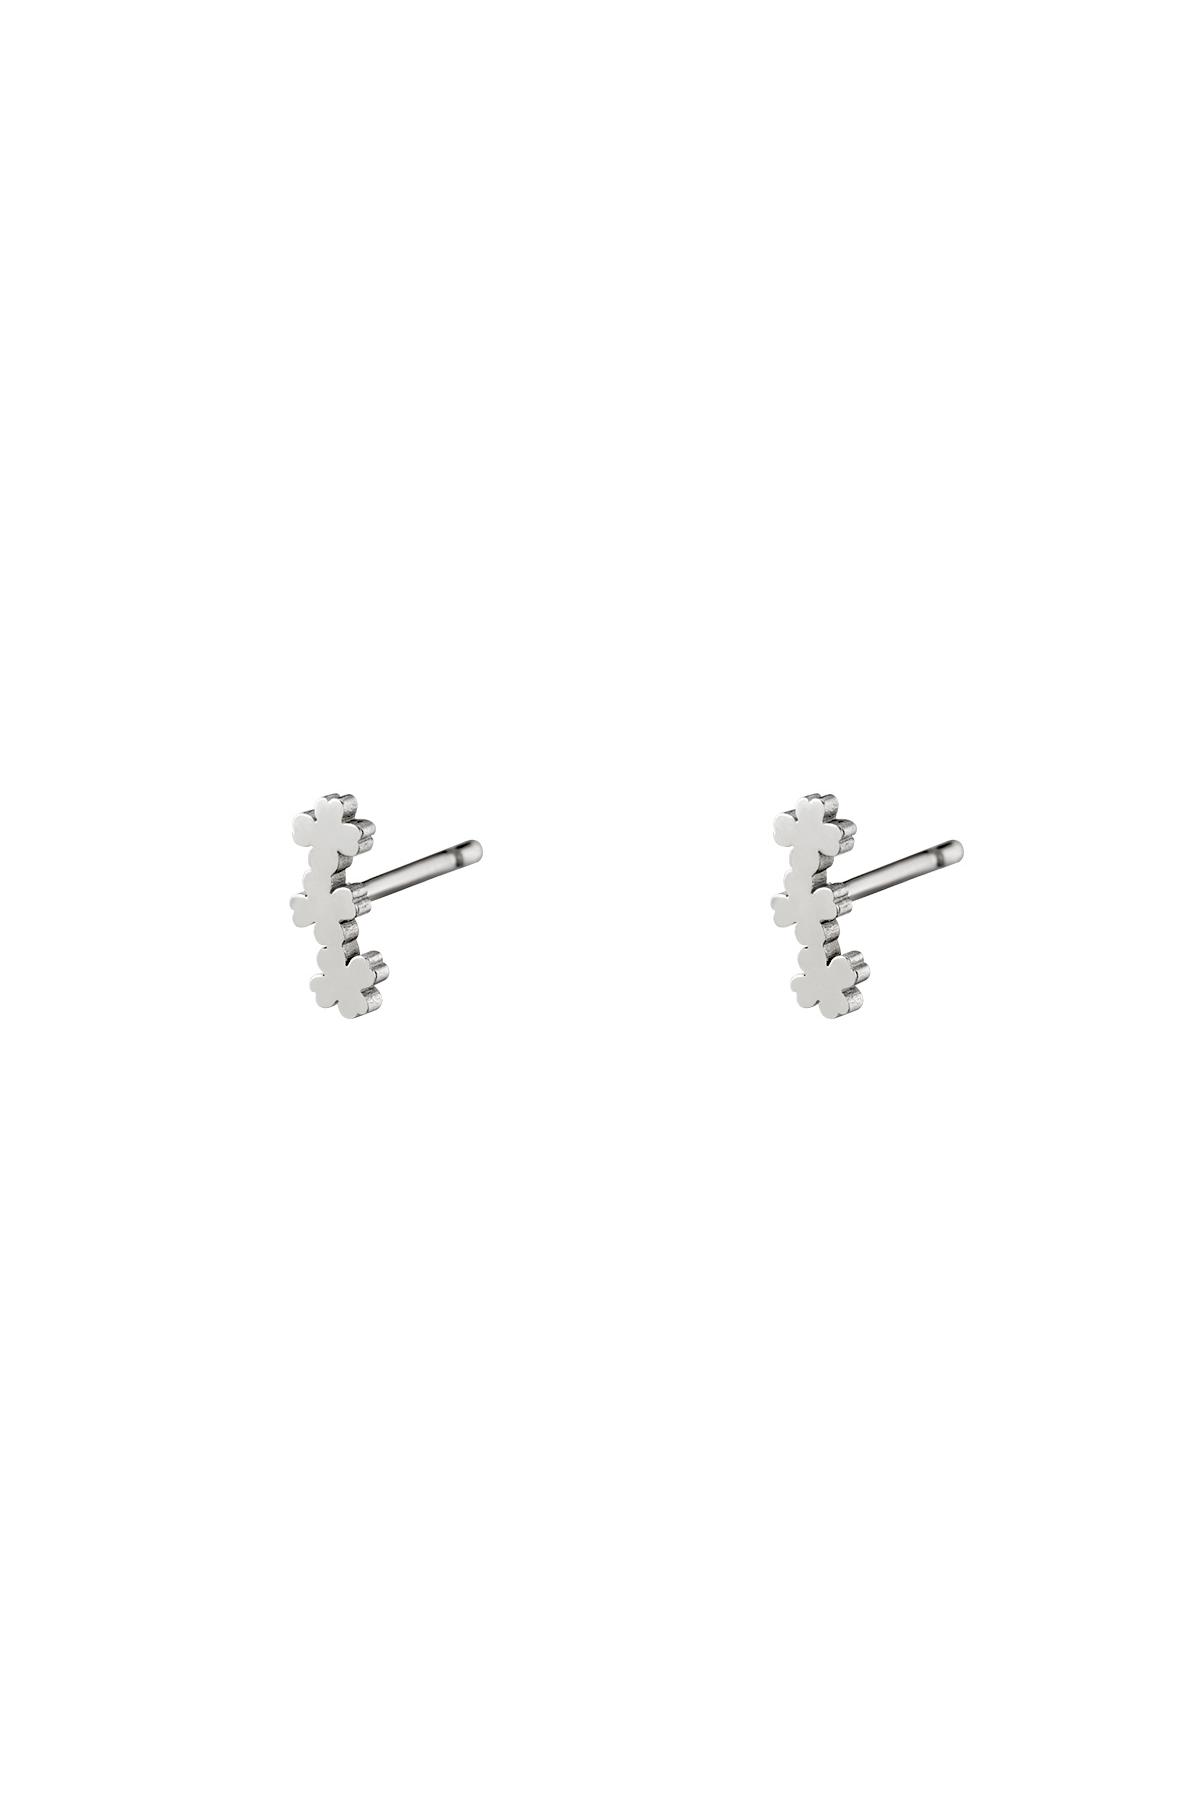 Stainless Steel Earstuds Three Clovers Silver 